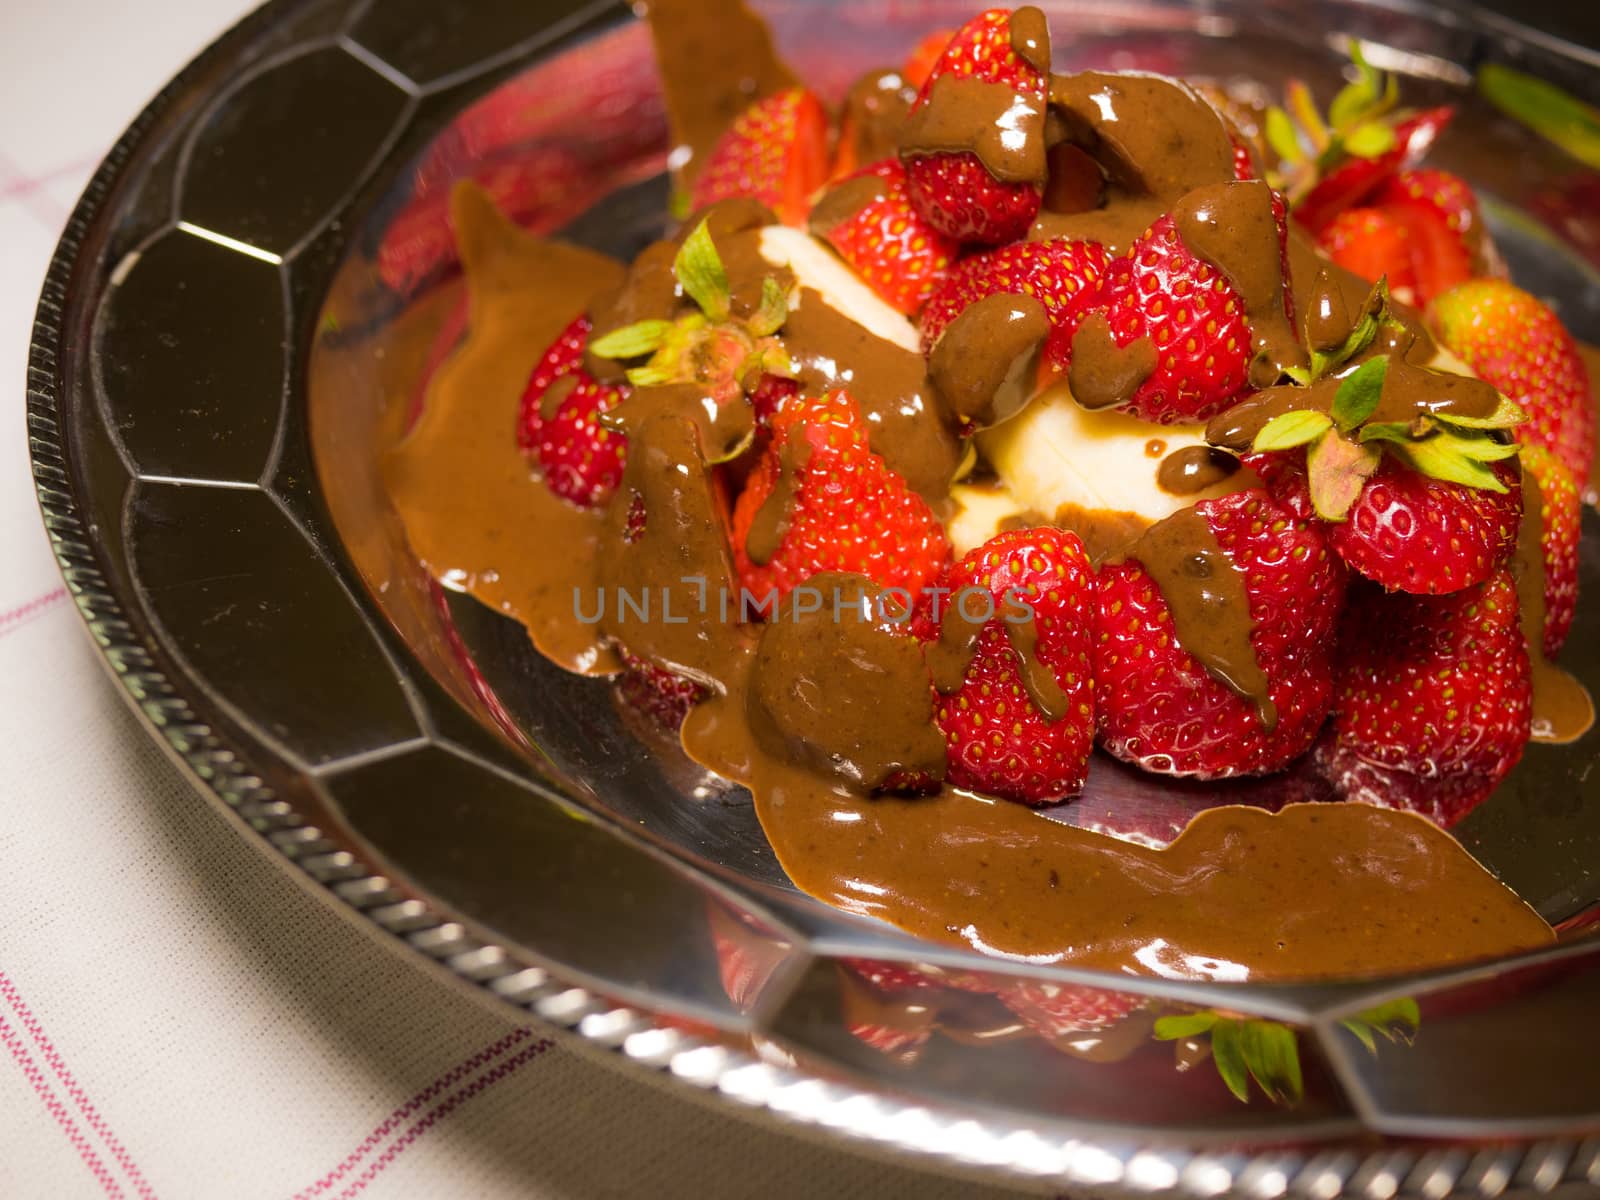 strawberry with hot chocolate on silver plate